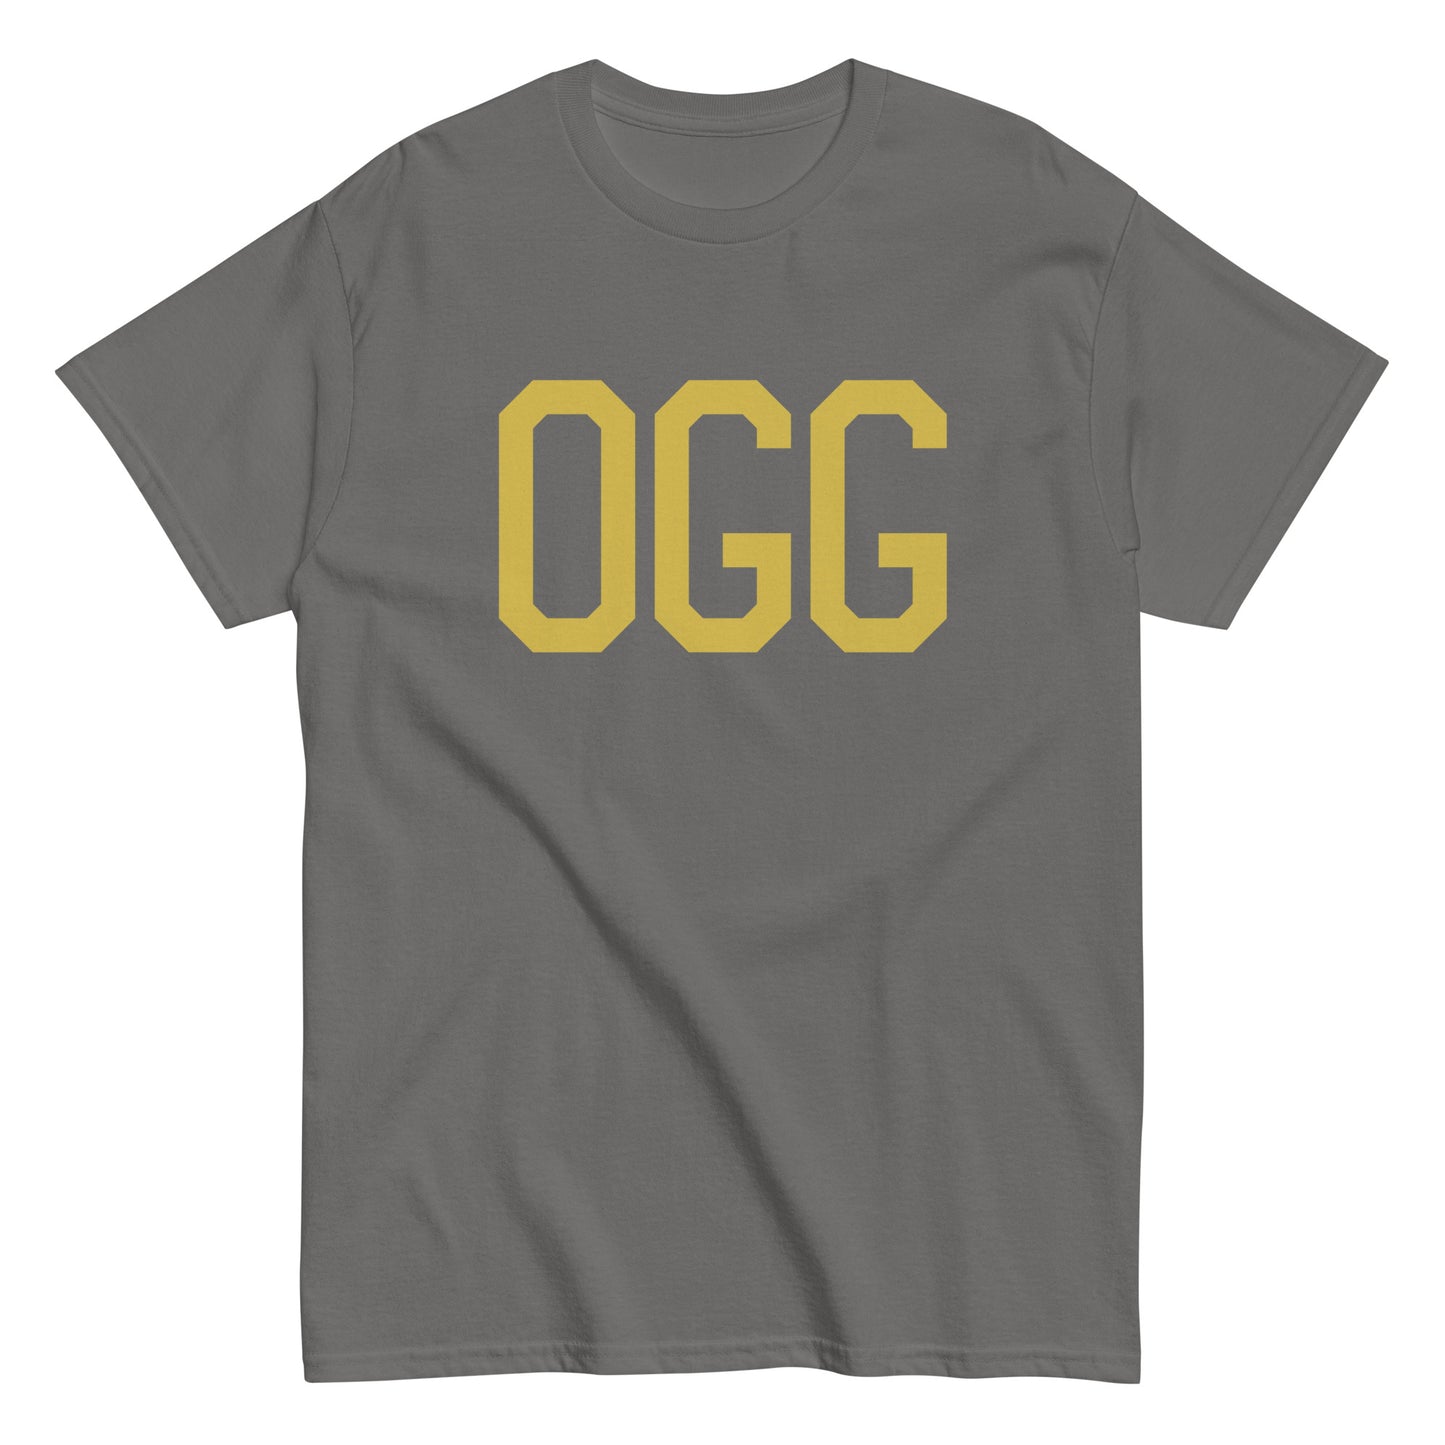 Aviation Enthusiast Men's Tee - Old Gold Graphic • OGG Maui • YHM Designs - Image 01